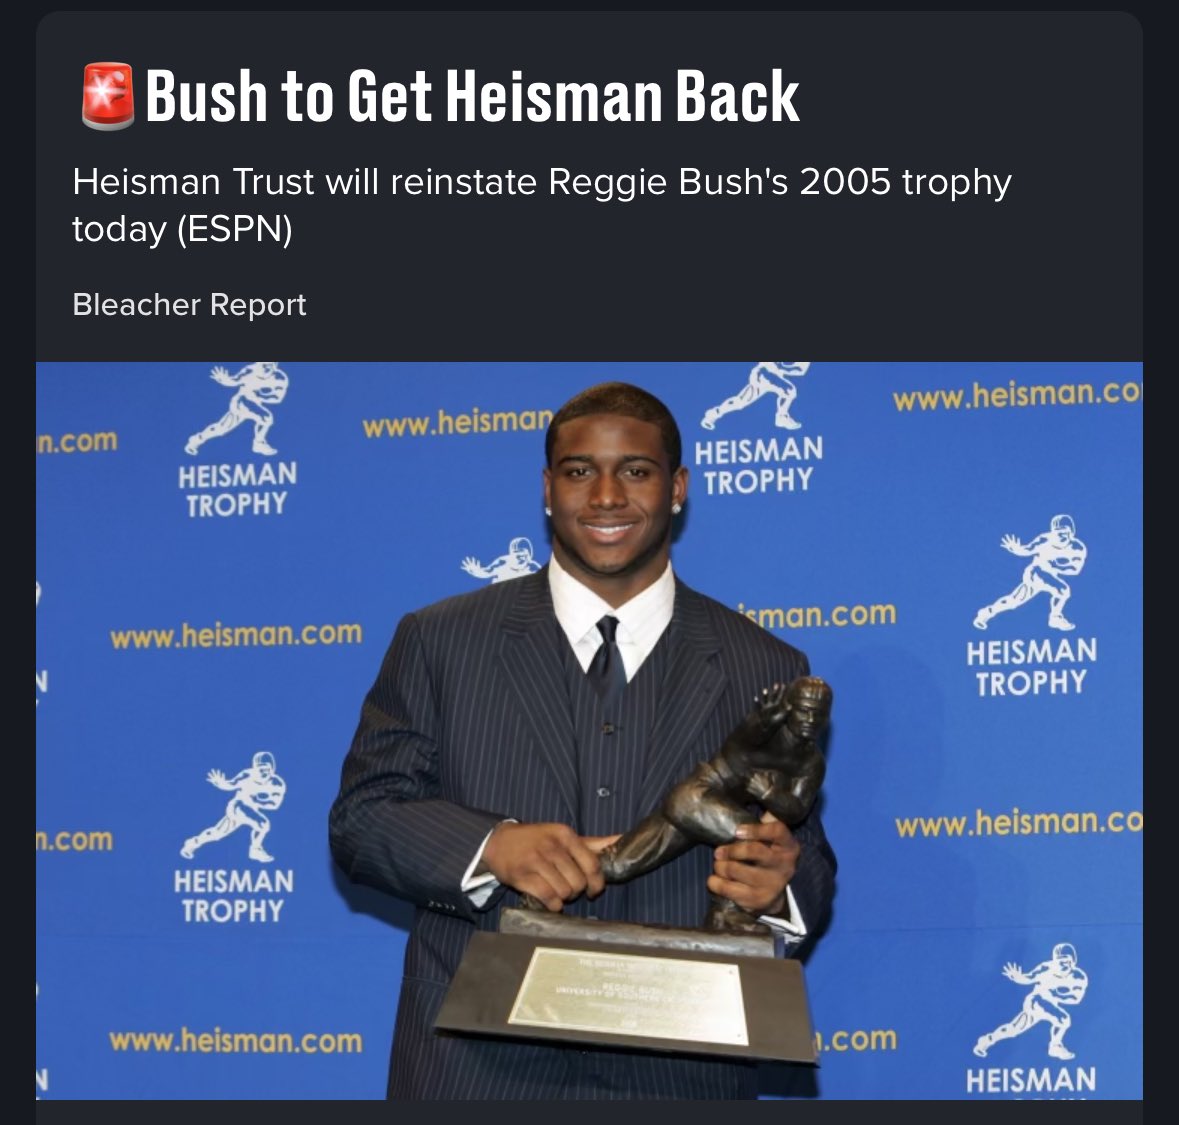 FINALLY! Congrats to the best college football player of all time! @ReggieBush @uscfb #FIGHTON #USCTROJANS @USC_Athletics